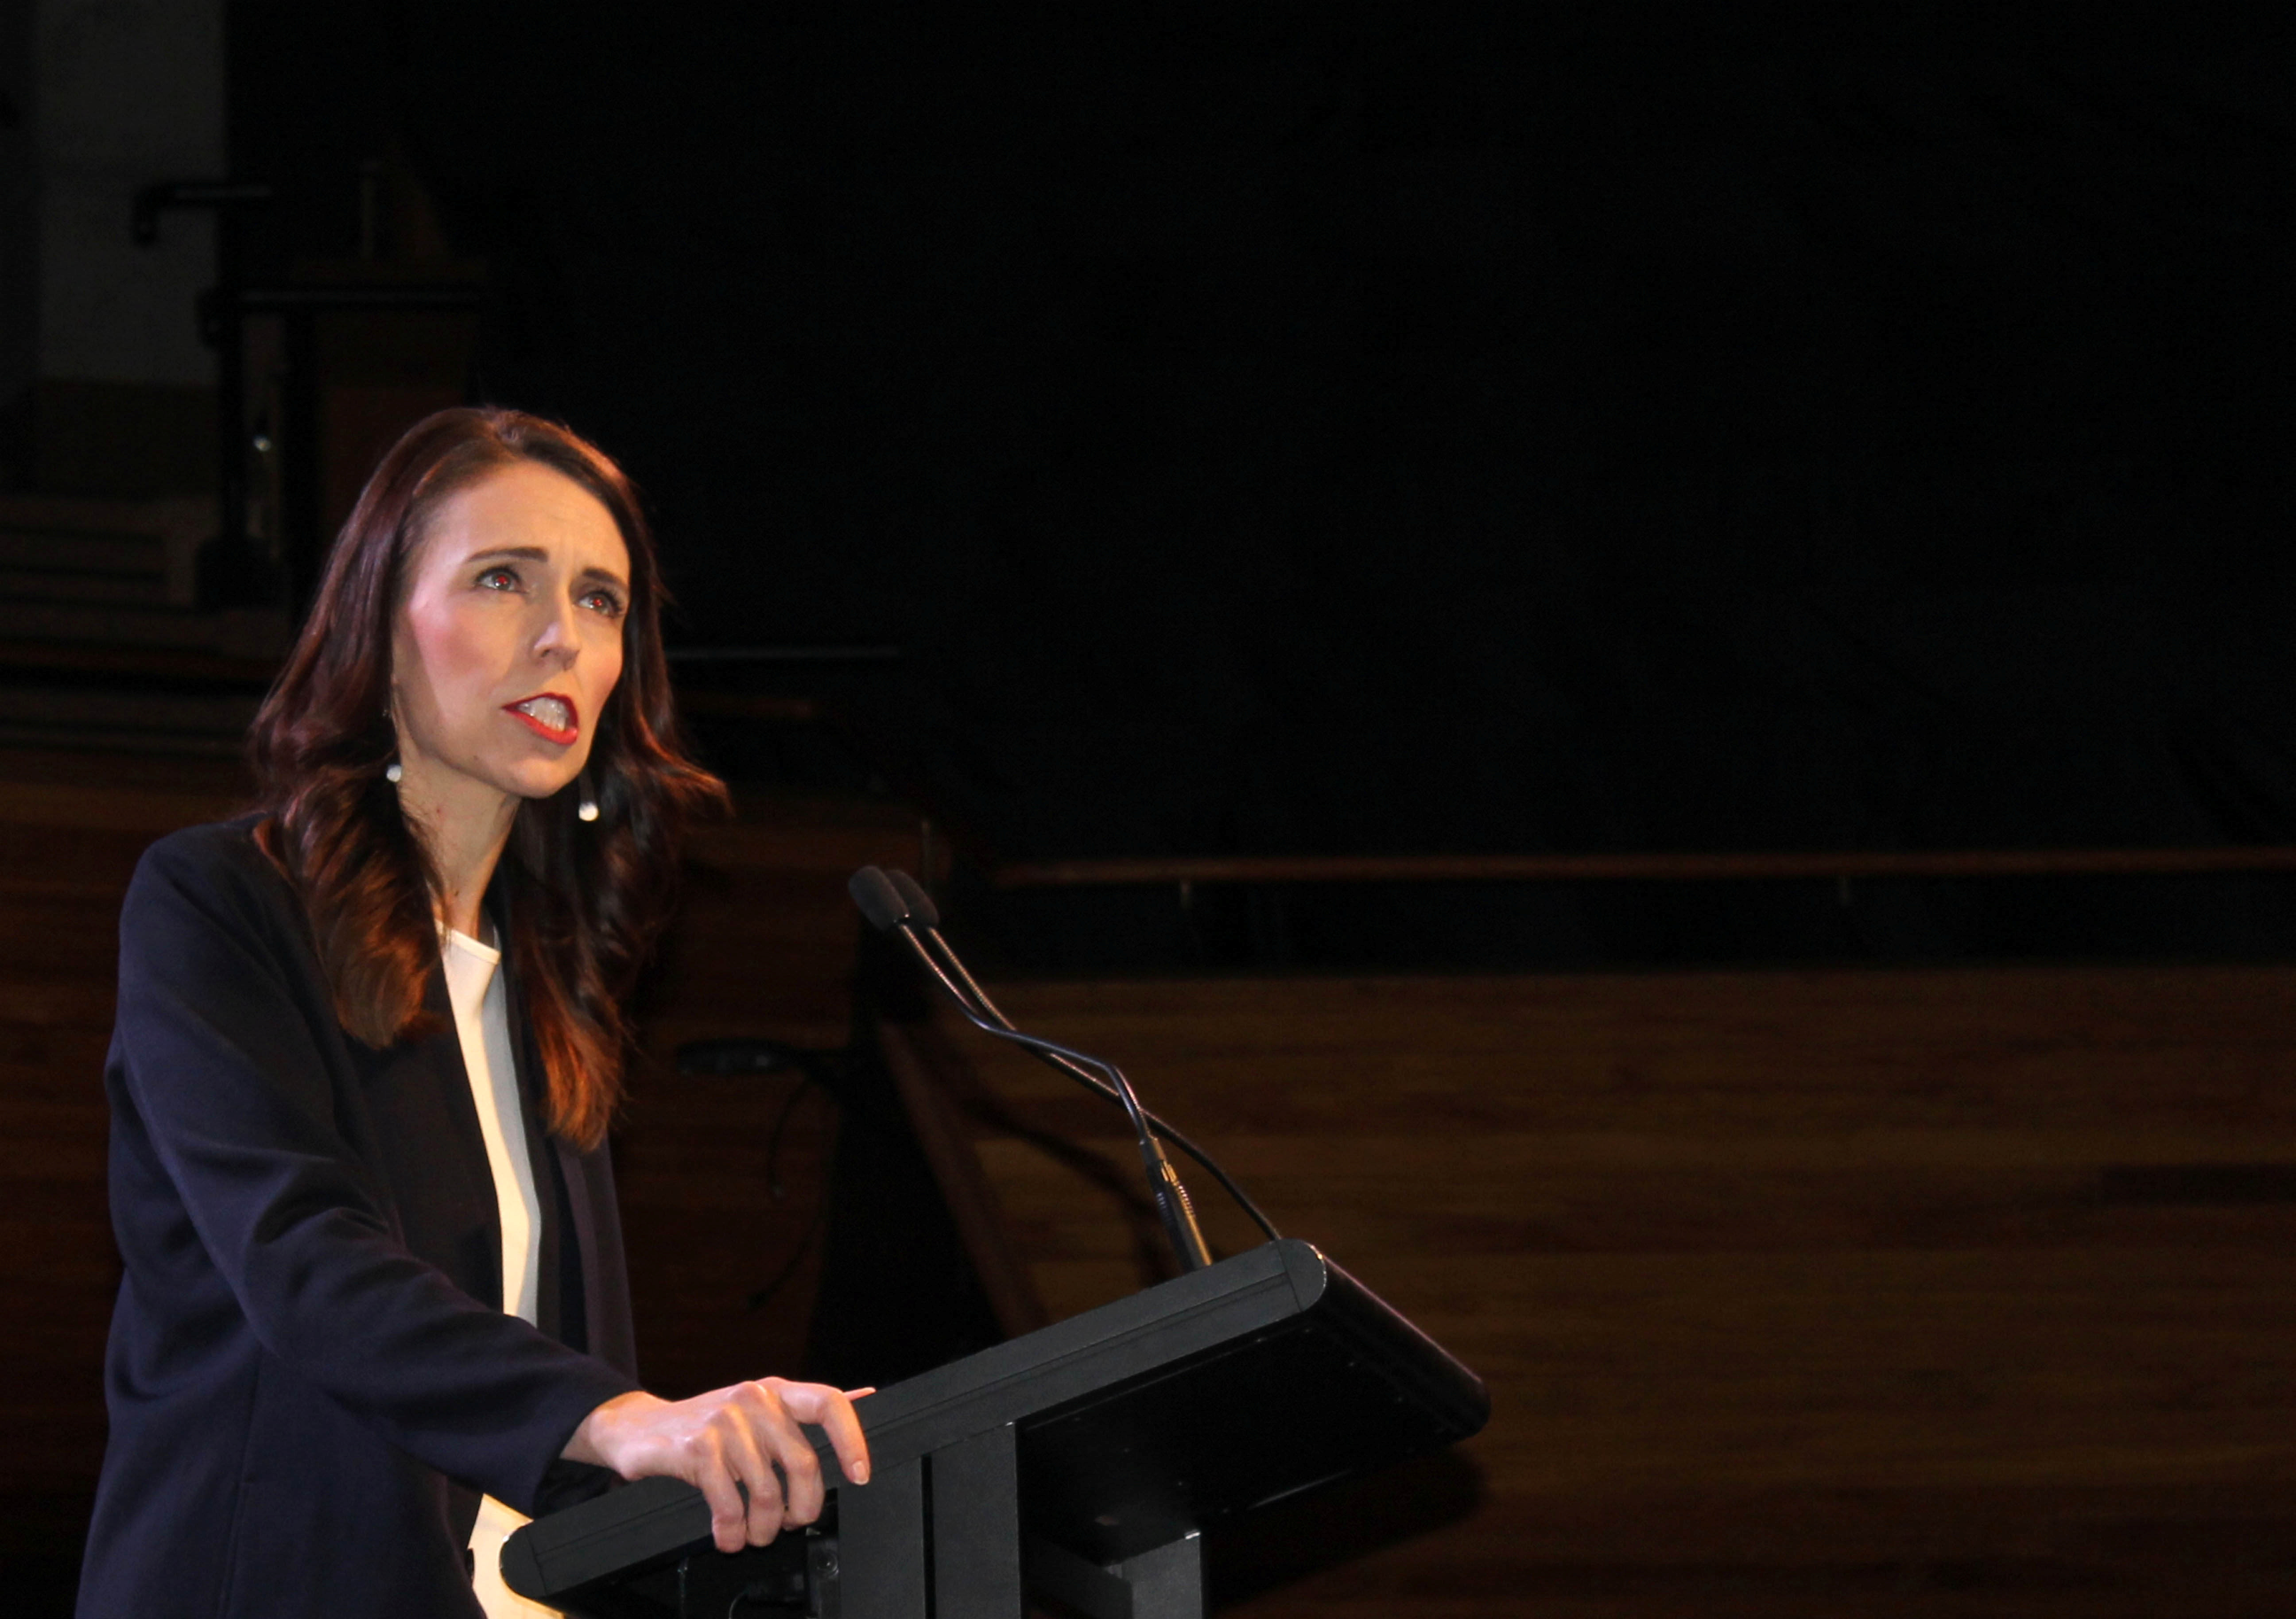 Prime Minister Jacinda Ardern addresses her supporters at a Labour Party event in Wellington